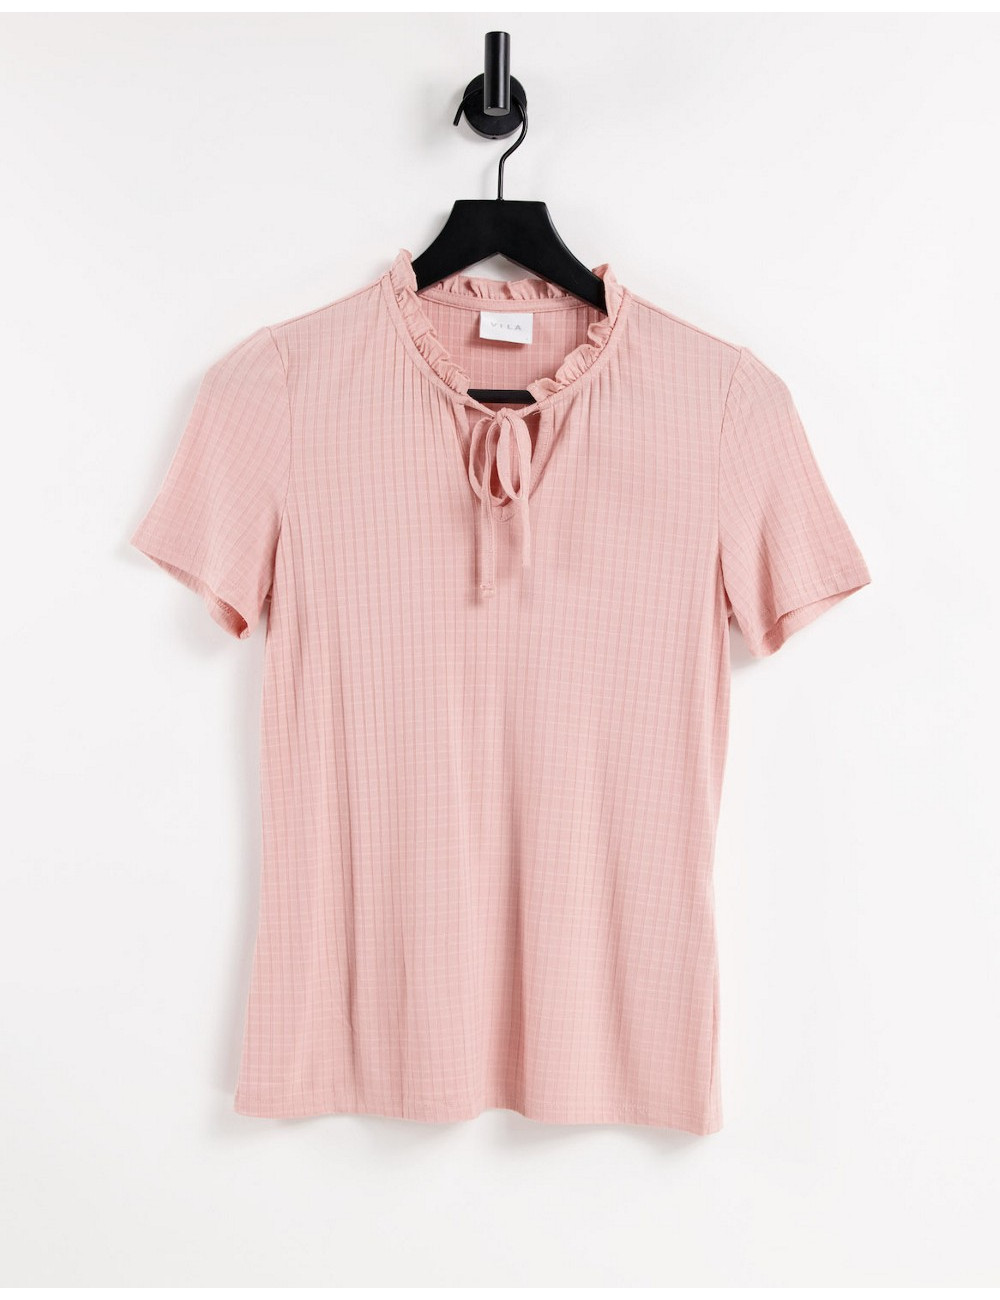 Vila polo top in pink